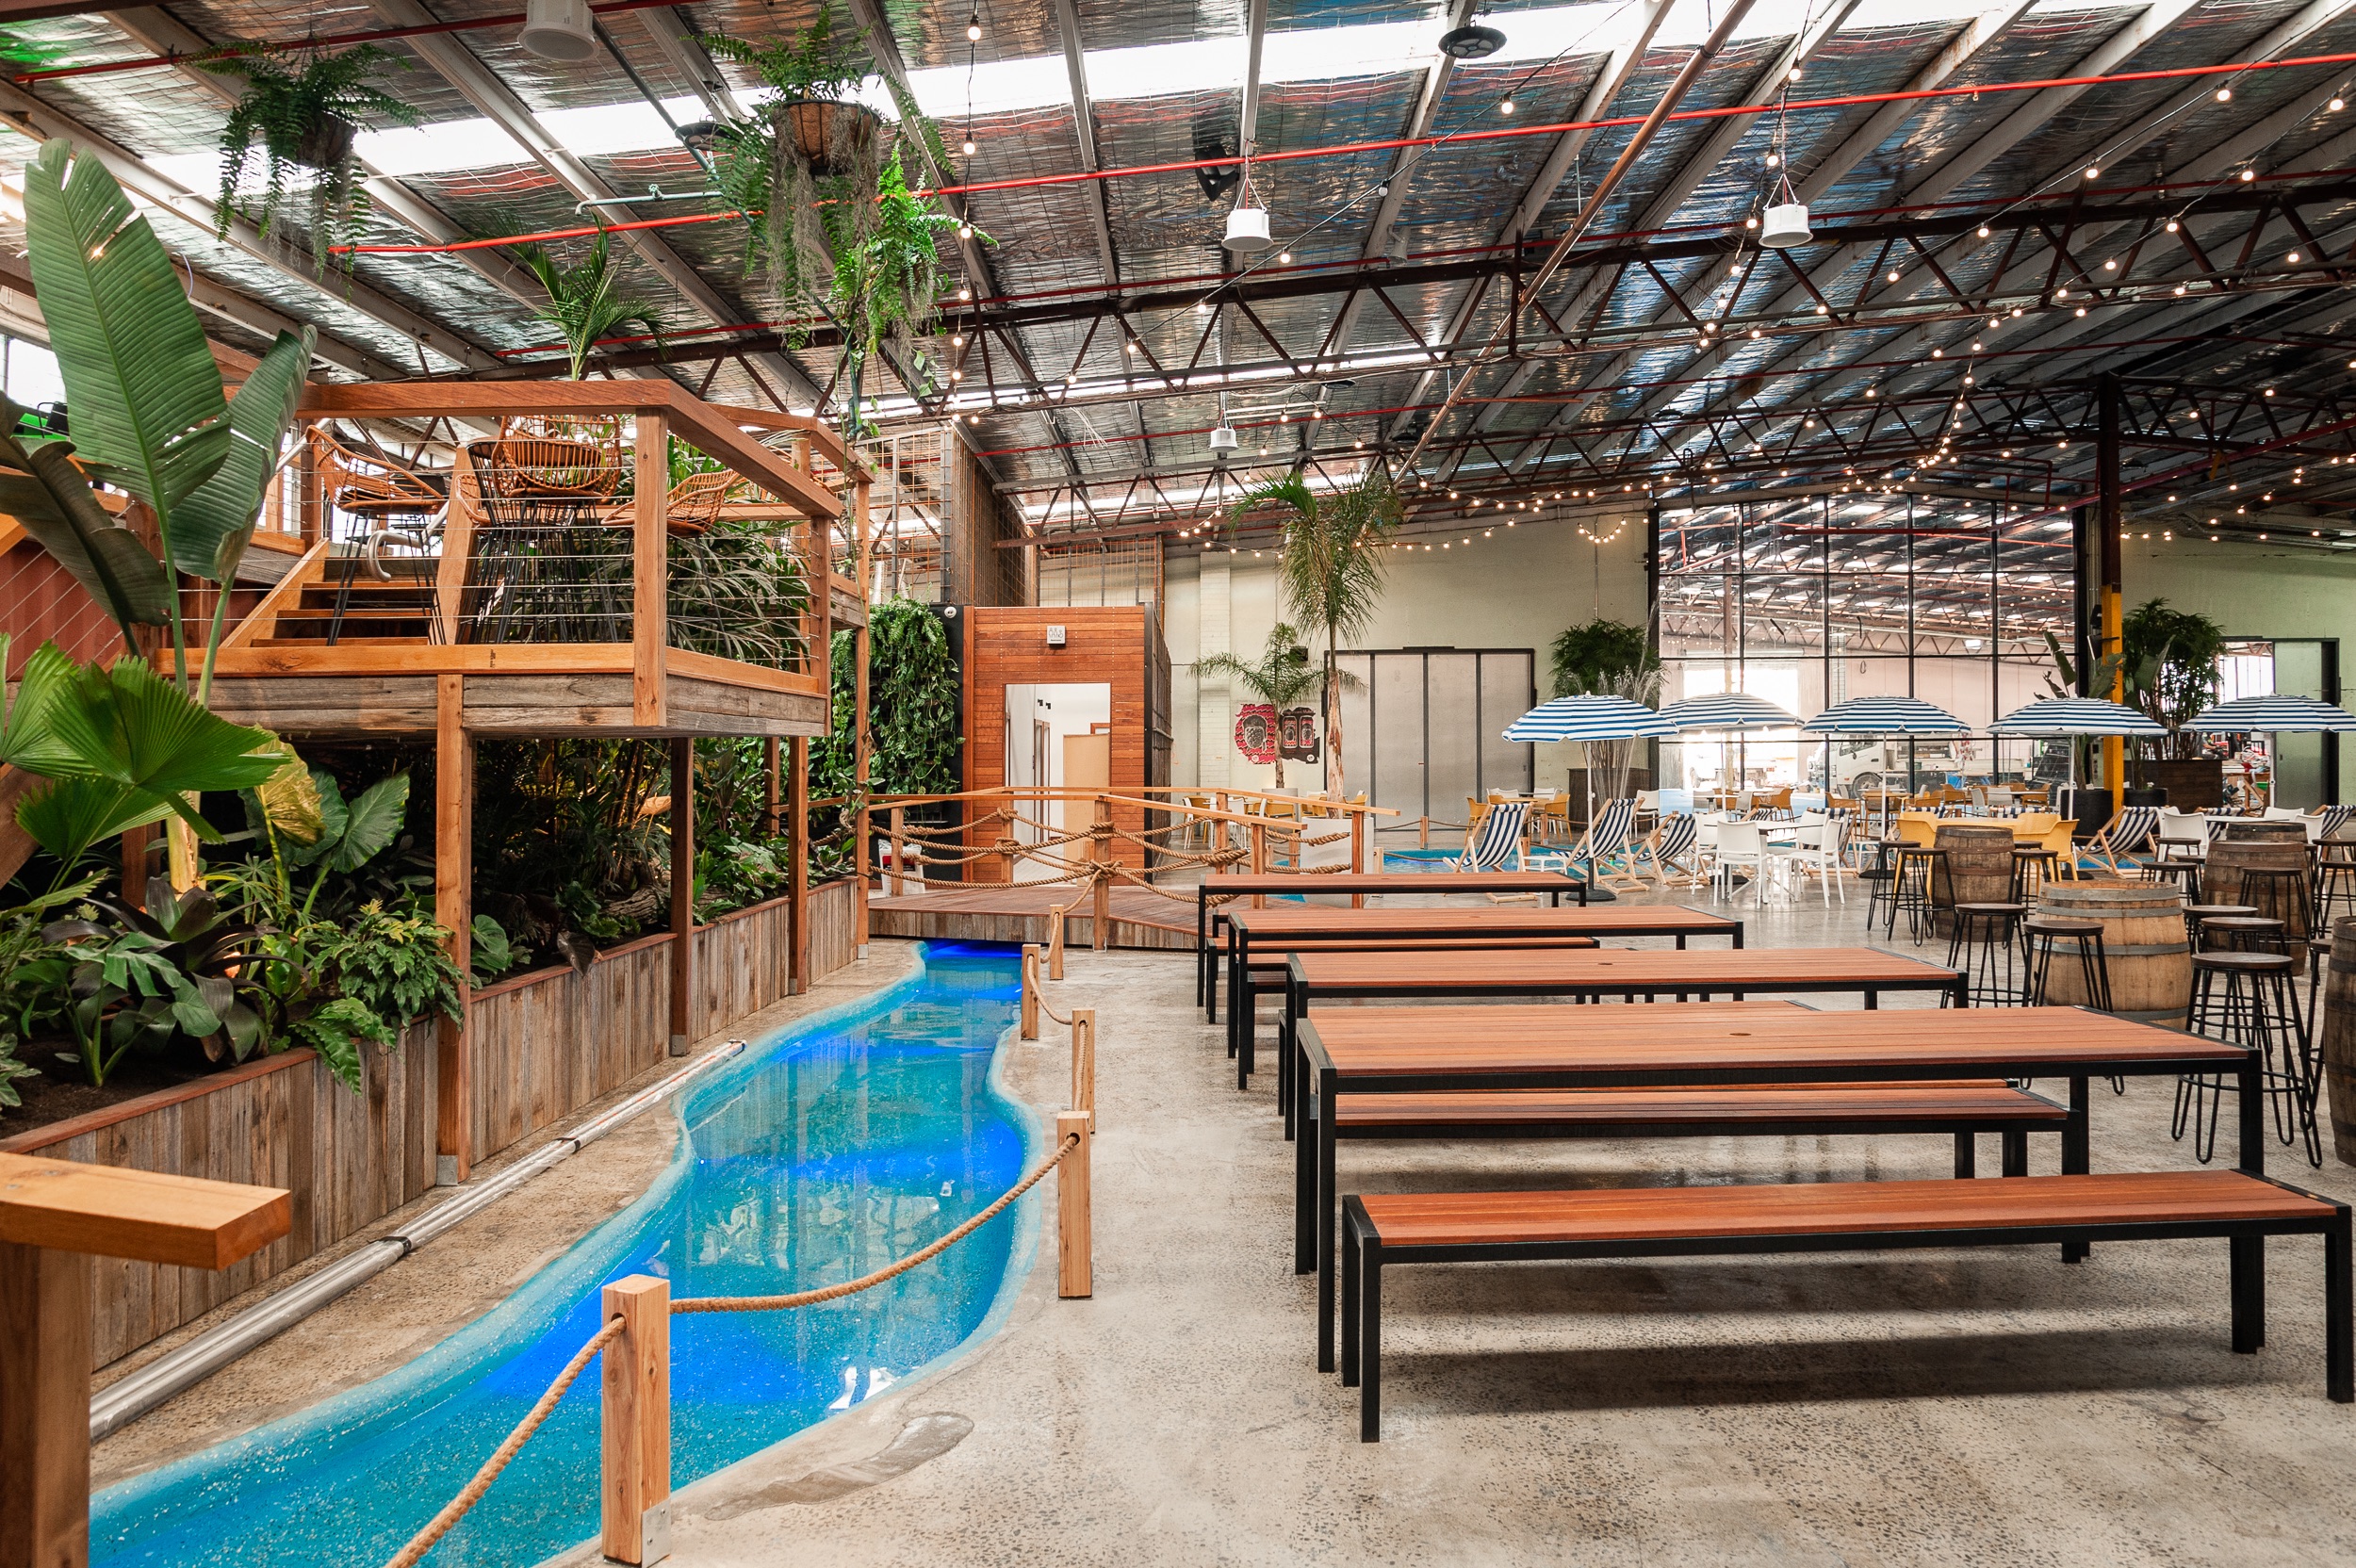 At Moon Dog World, You Can Sip A Beer In A Deck Chair Beside A Lagoon